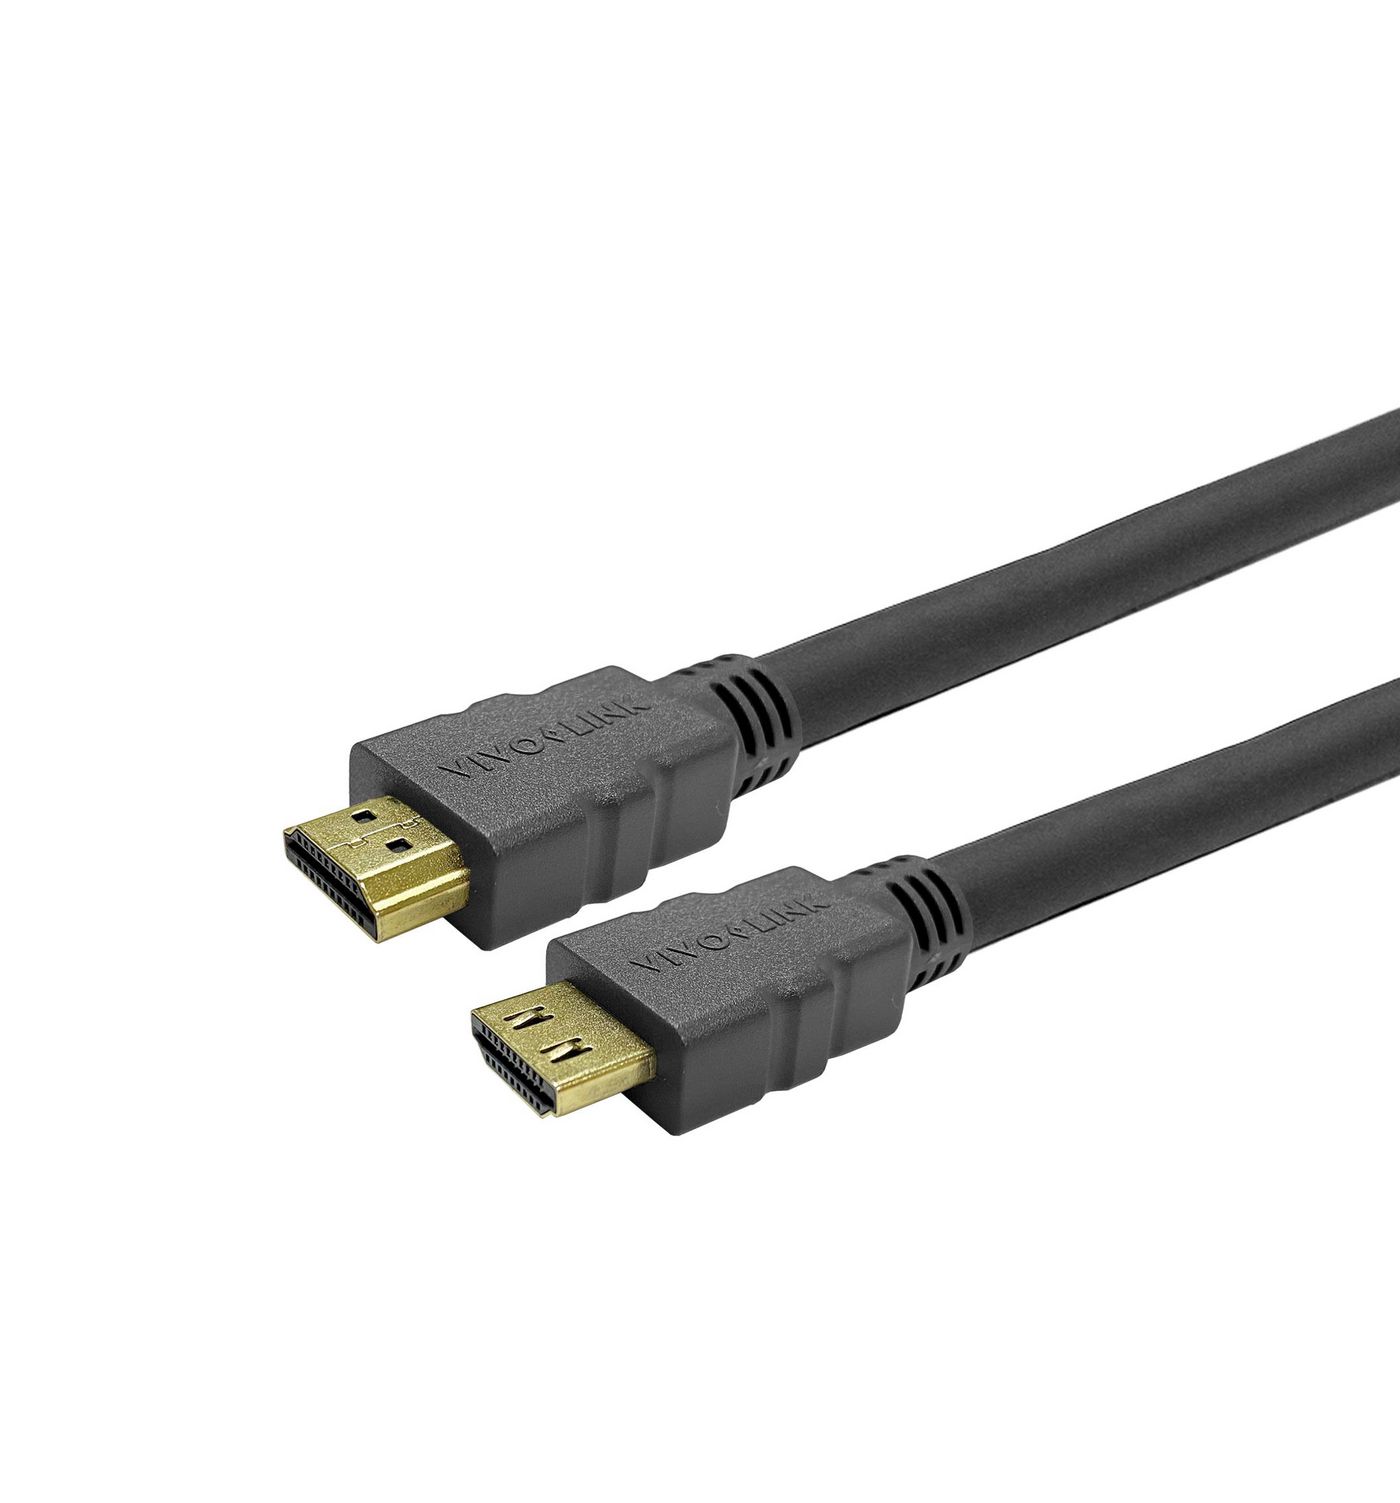 PRO HDMI CABLE W/LOCK SPIKE